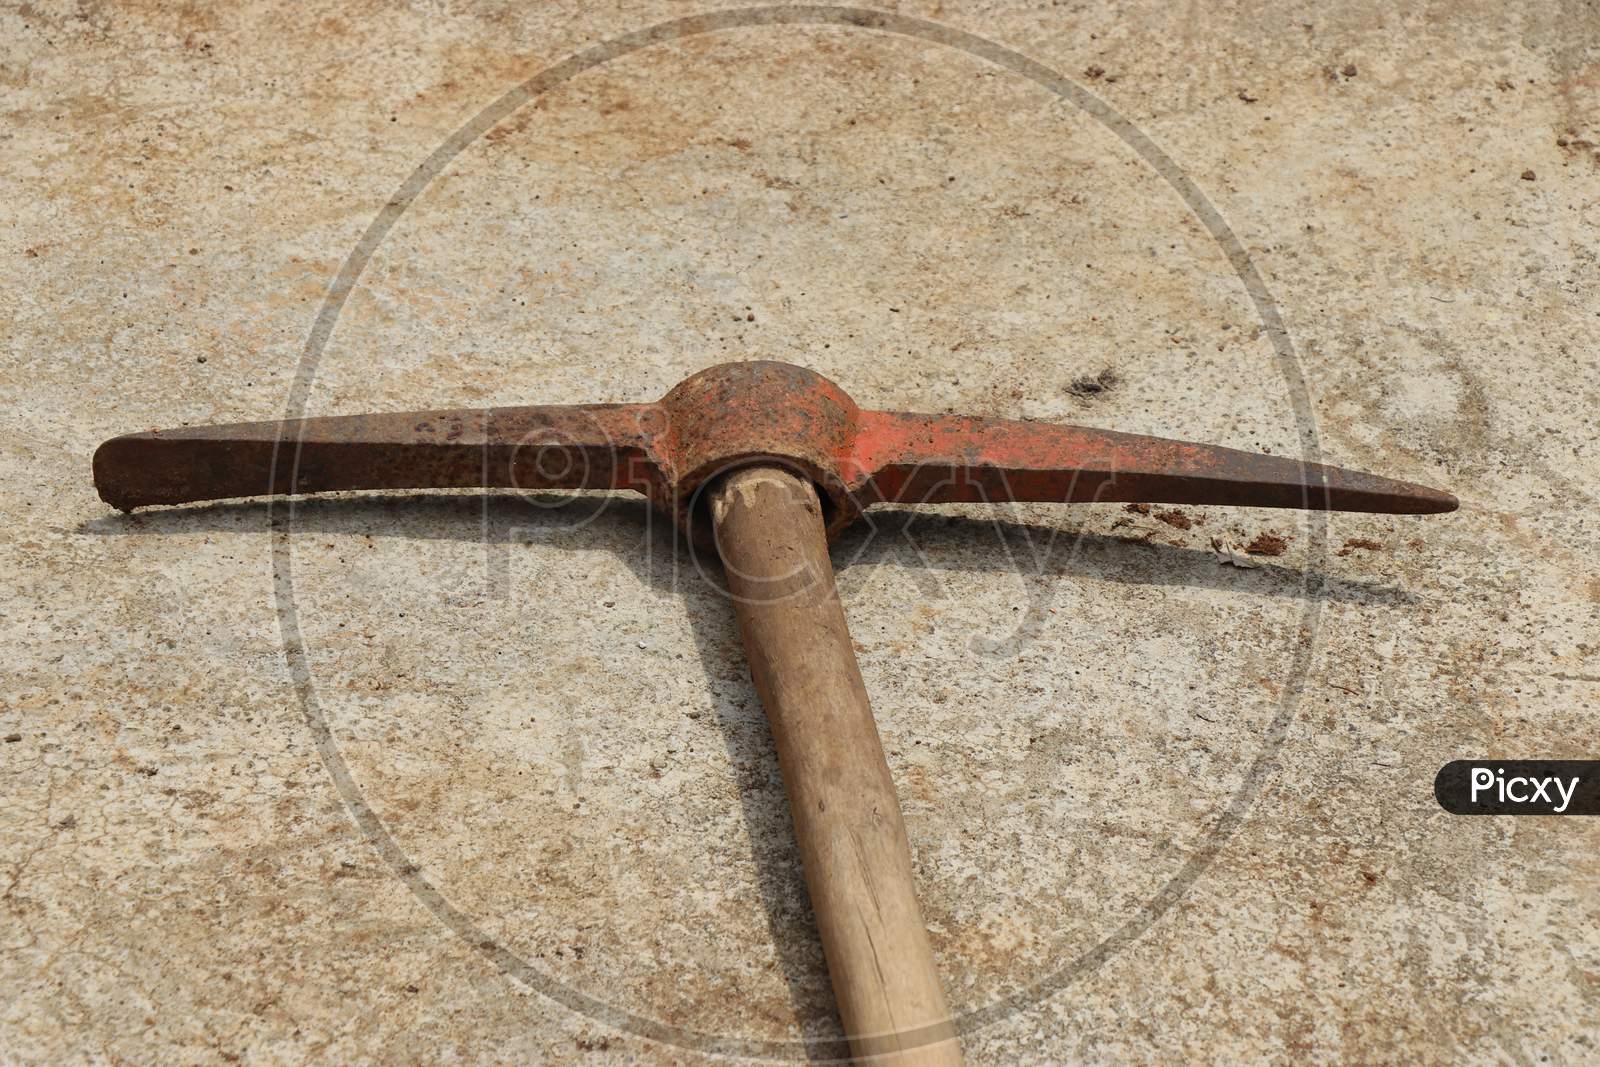 Old Pickaxe With Wooden Handle Kept In Concrete Floor